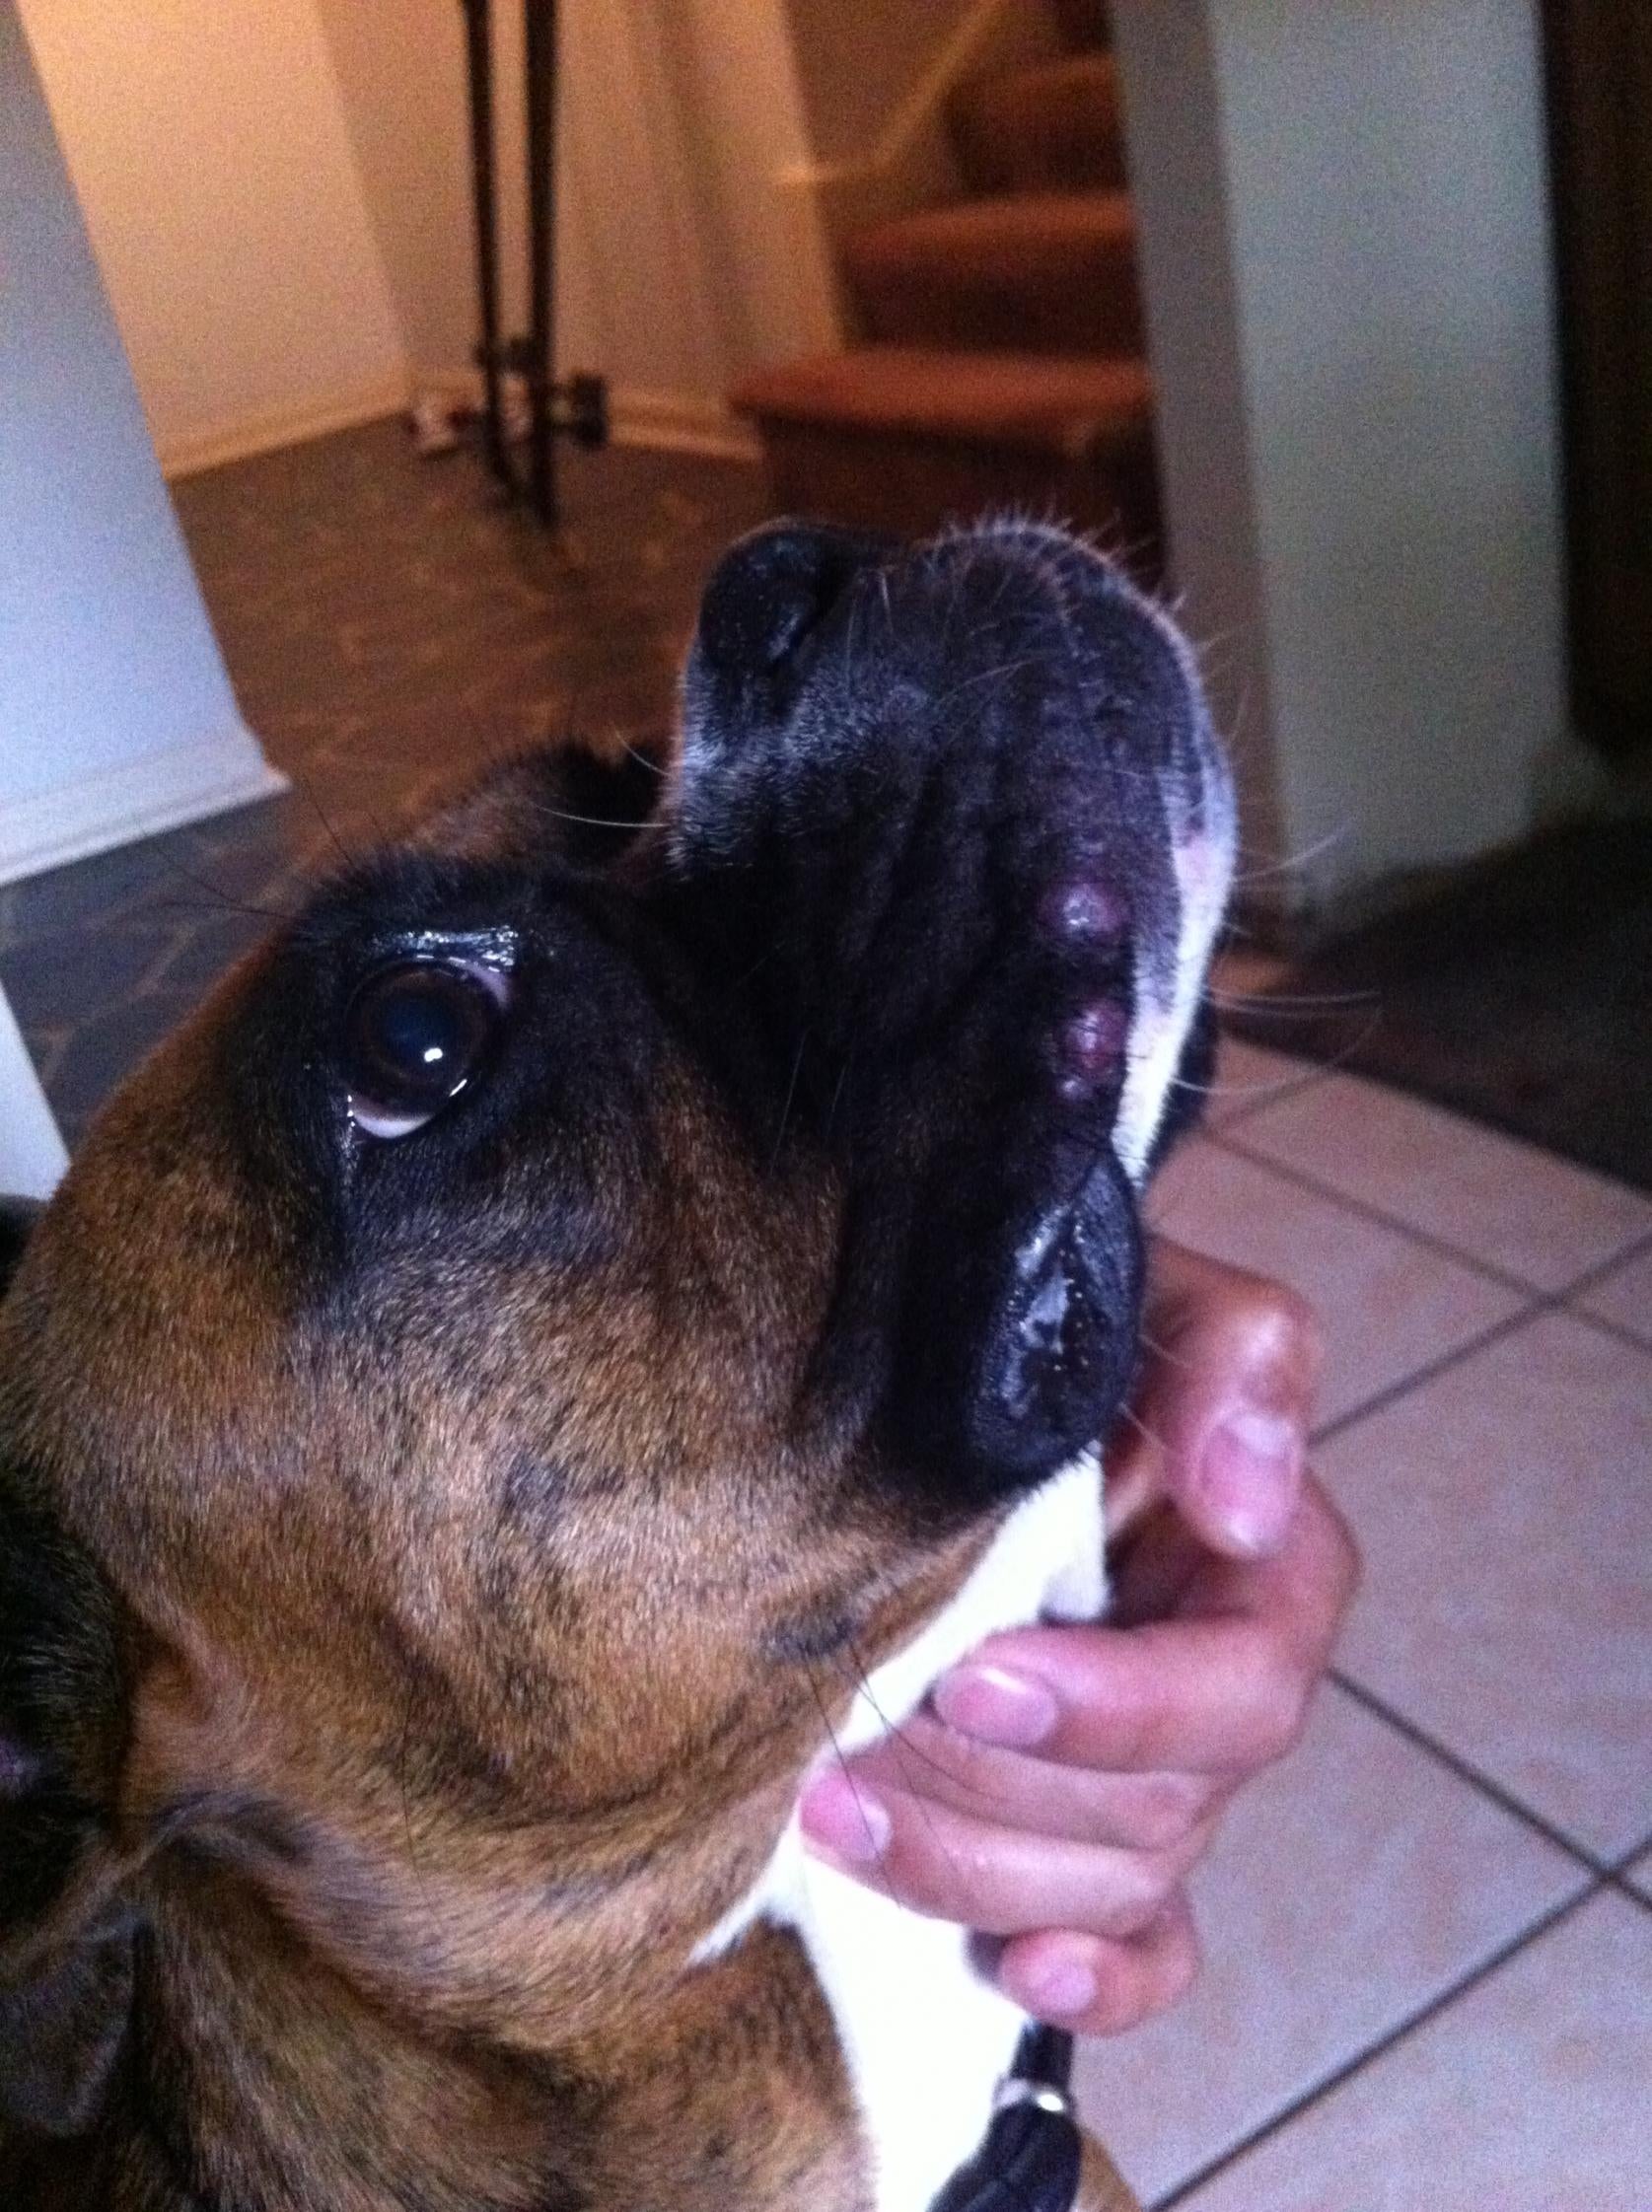 Bumps On My Pups Lips Boxer Breed Dog Forums